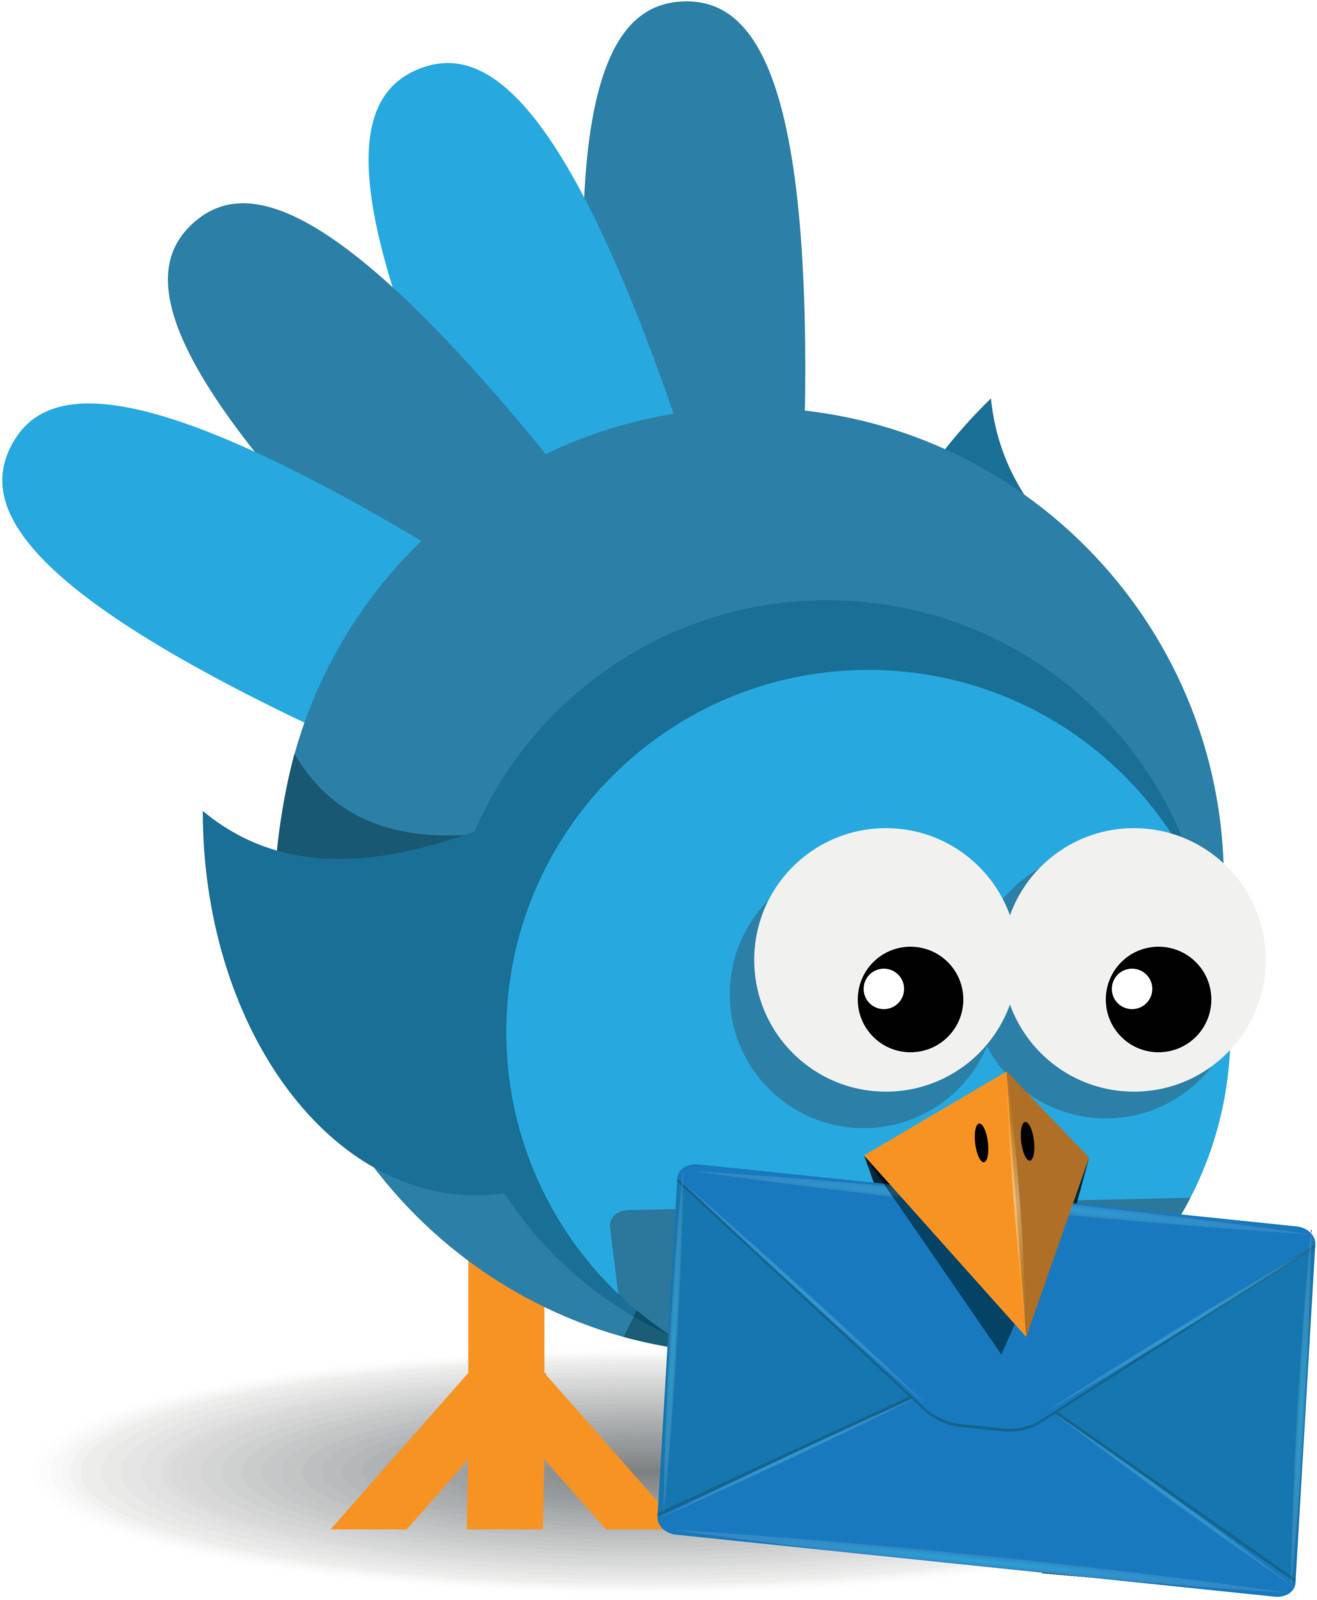 blue bird with a blue envelope by brux